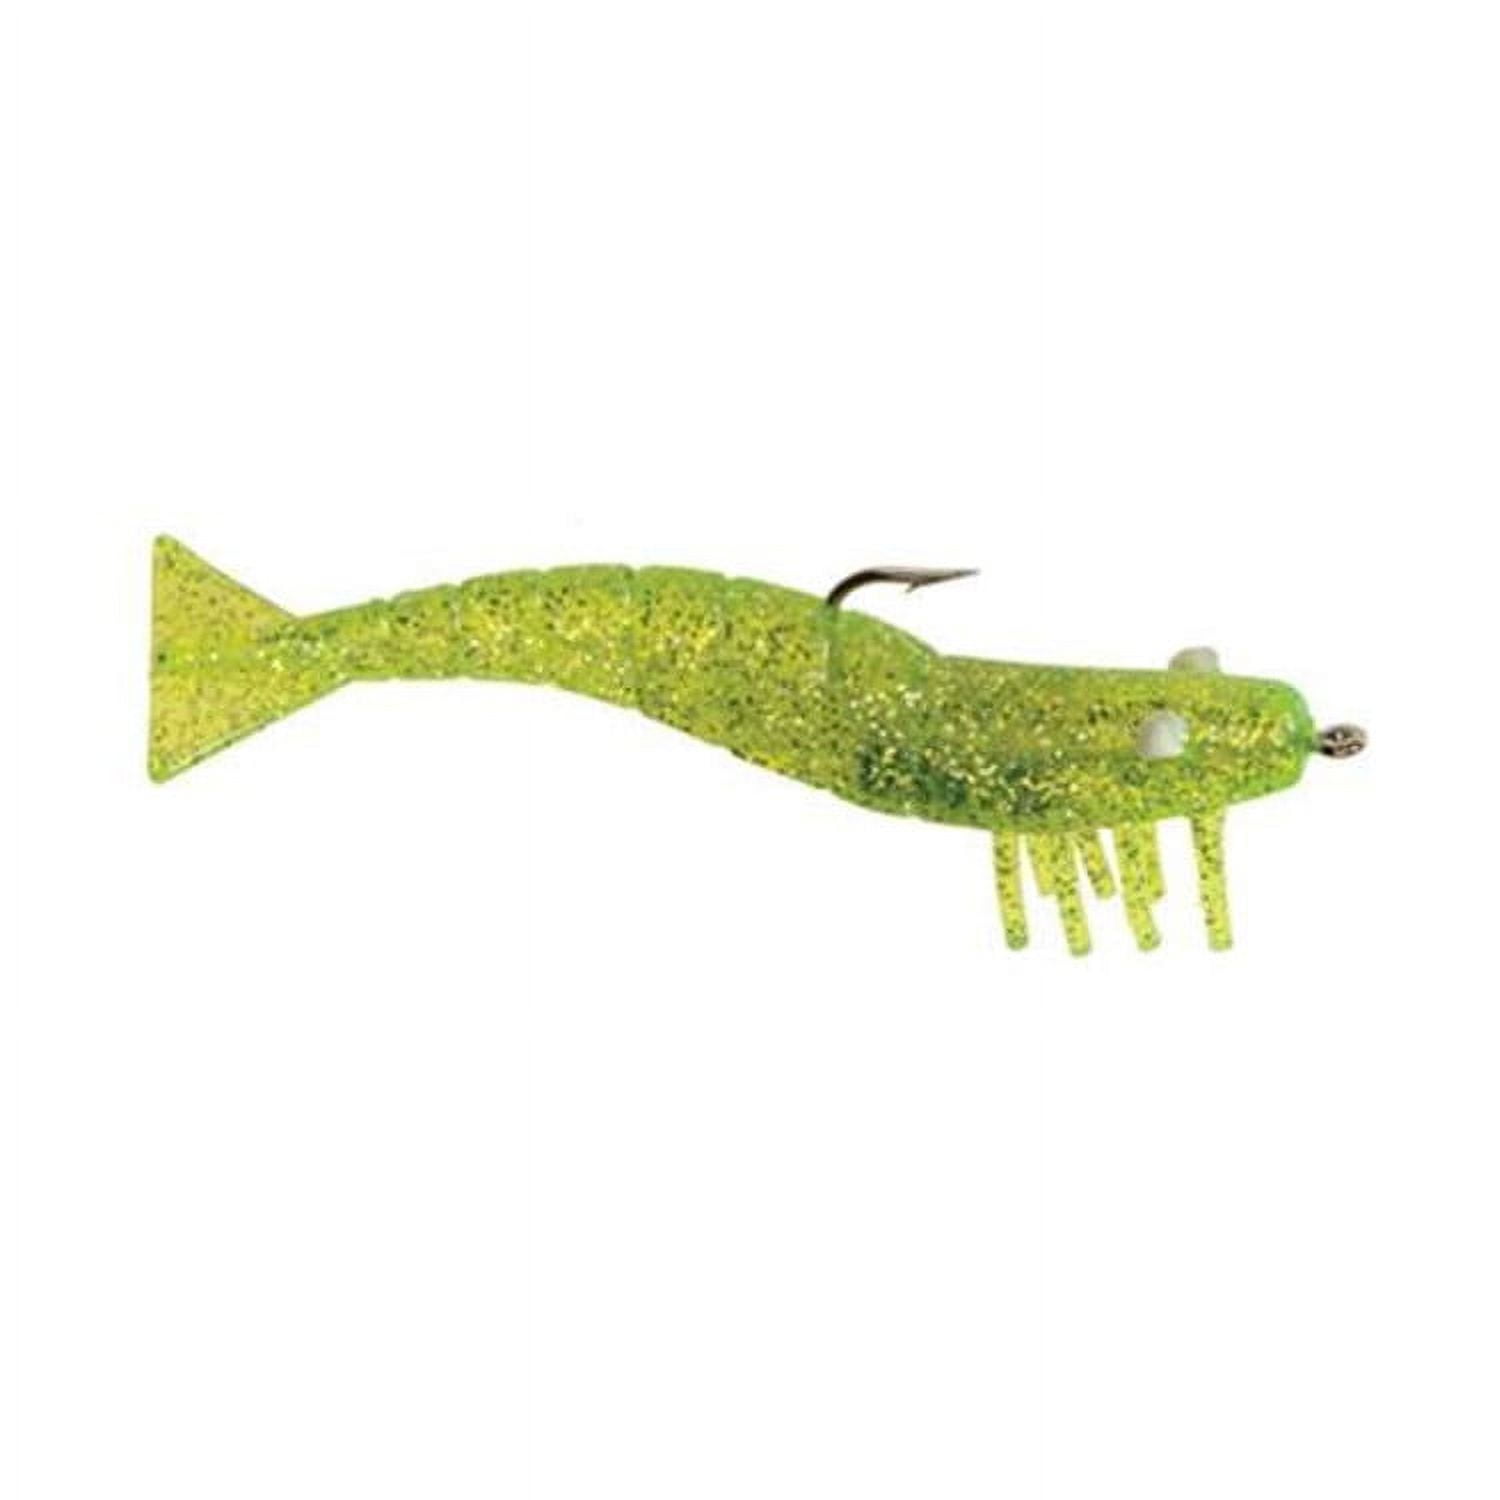  Tackle HD 2-Pack Square Bill Crankbait, 2.75 Lipped Rattle  Crankbaits with Fishing Hooks, Top Water Fishing Lures for Crappie,  Walleye, Perch, or Bass Fishing, Chartreuse Black Back : Sports 